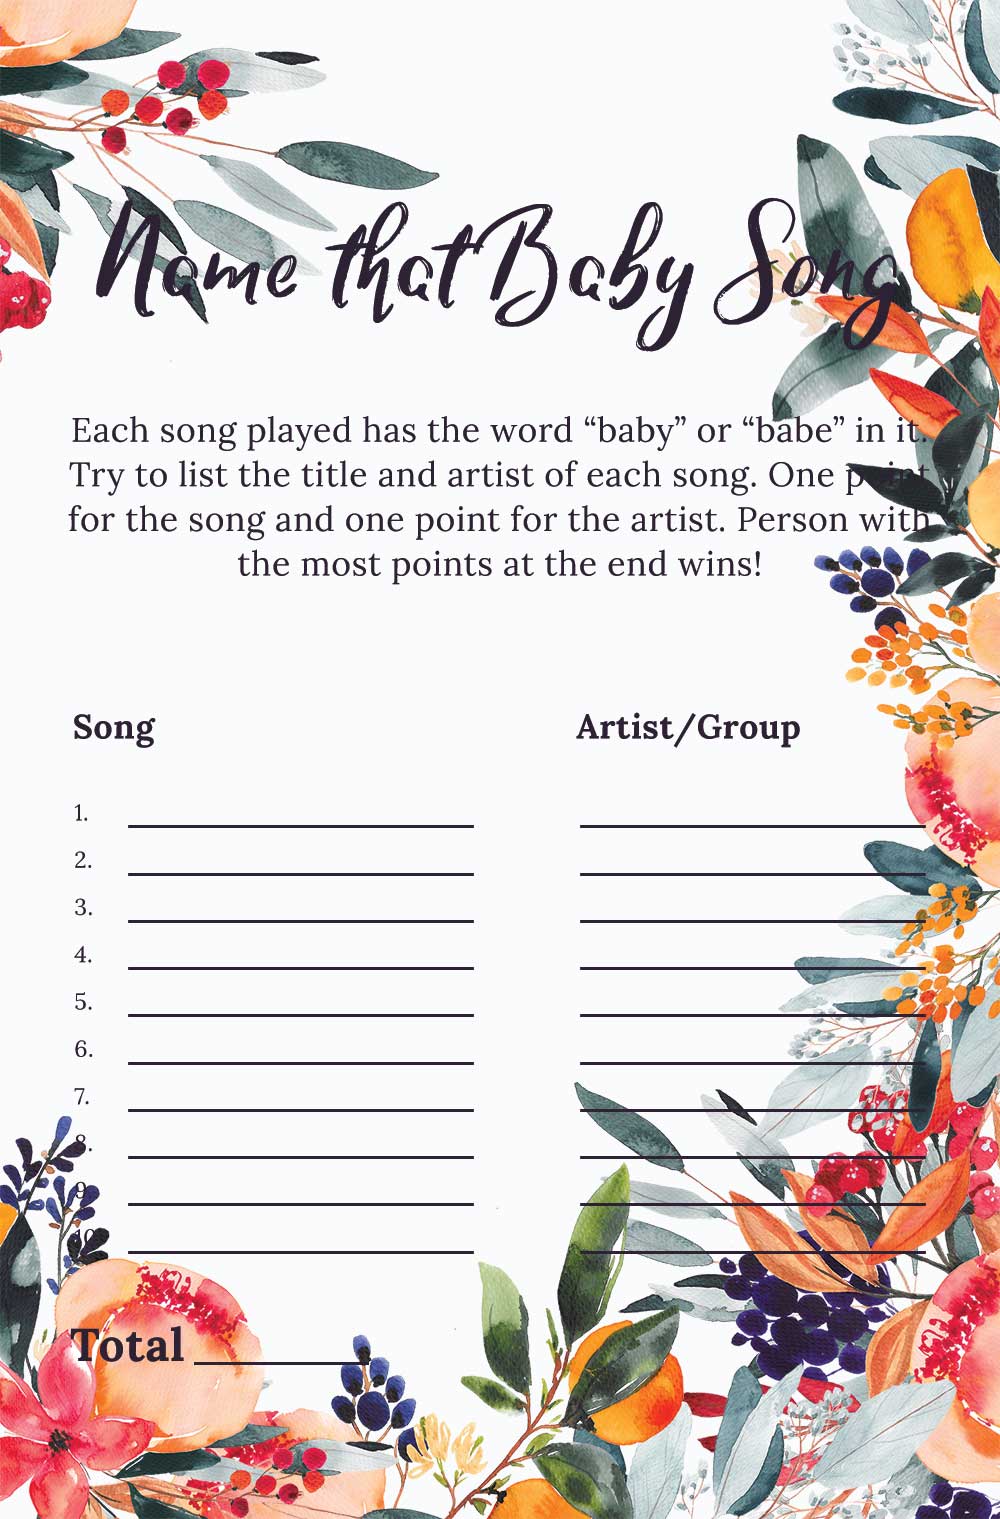 Name that baby song game - Summer theme